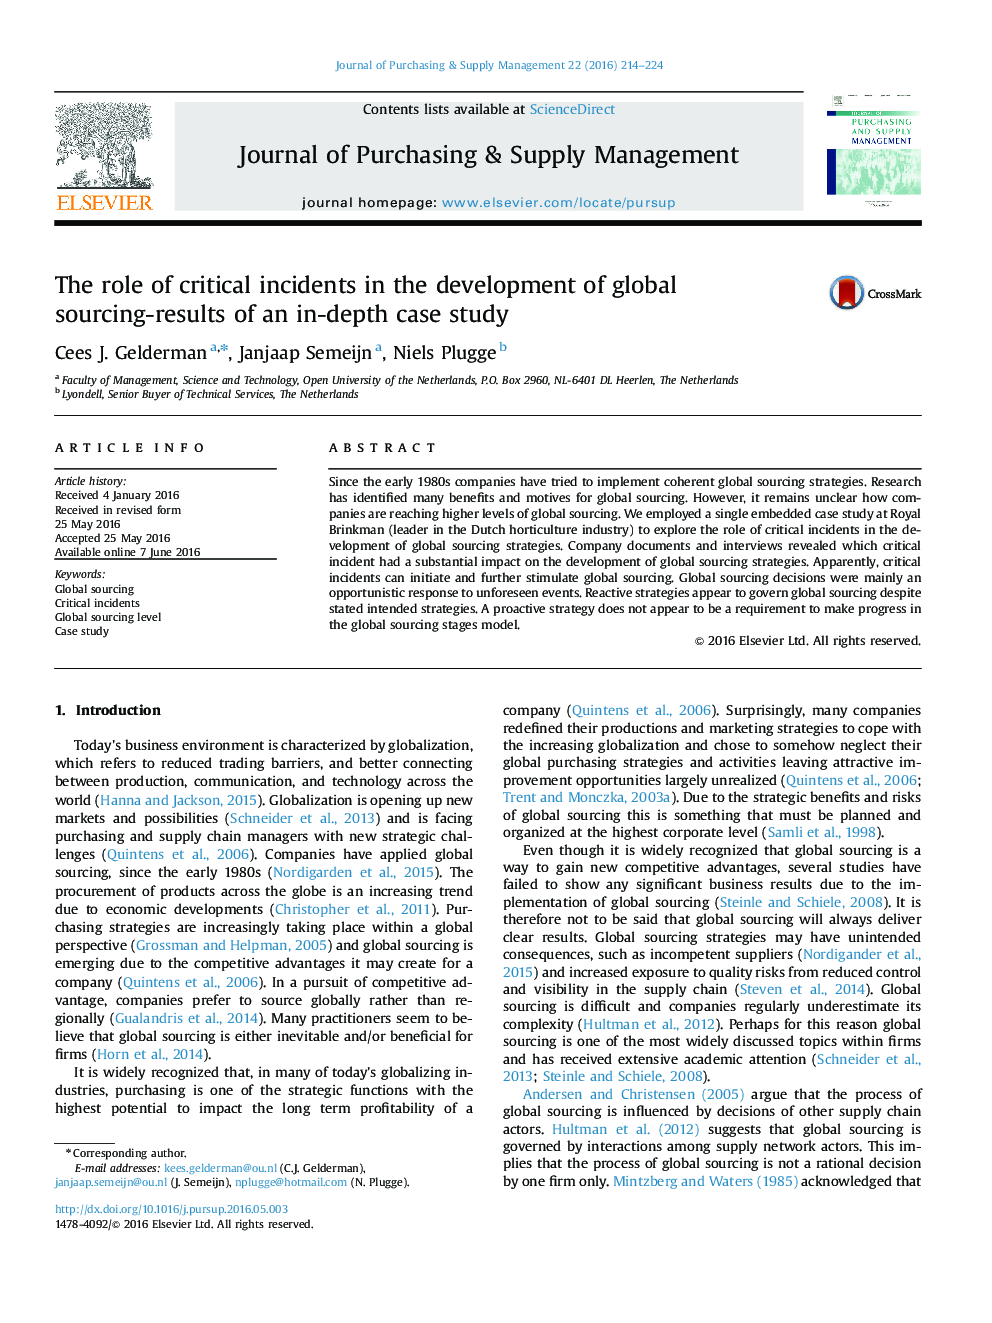 The role of critical incidents in the development of global sourcing-results of an in-depth case study